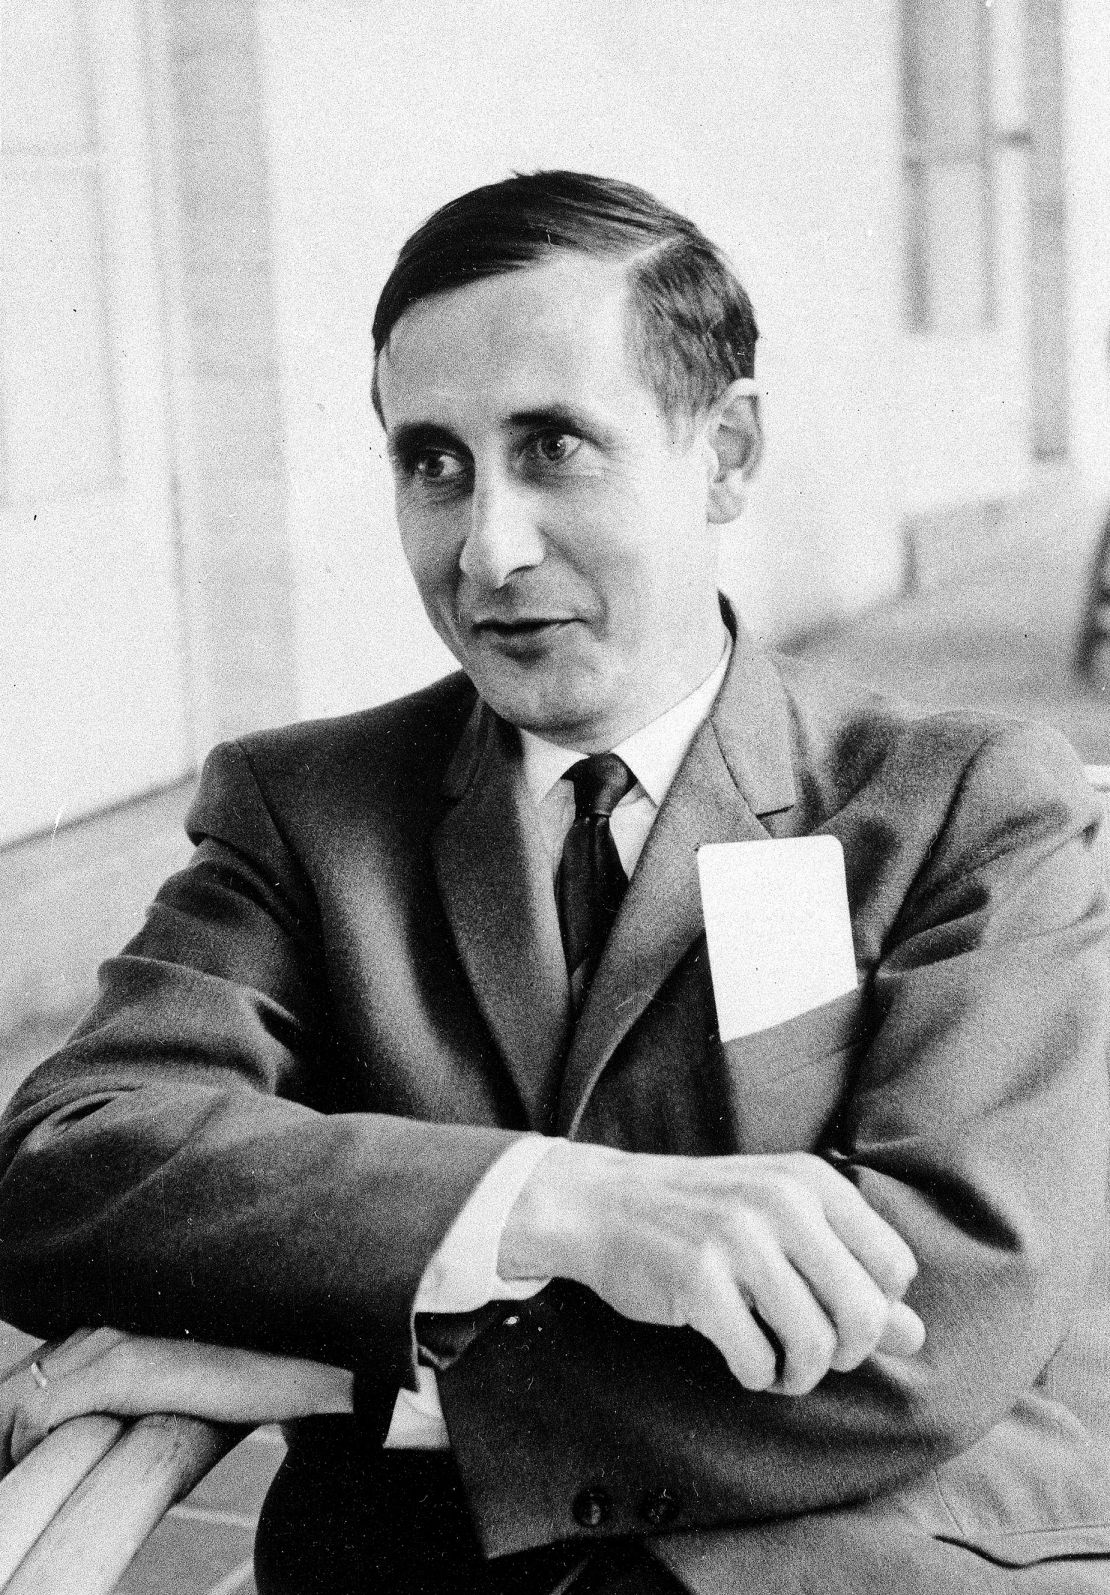 Physicist Freeman J. Dyson, shown here in August 1963, introduced this theory about hypothetical alien megastructures in a 1960 paper.